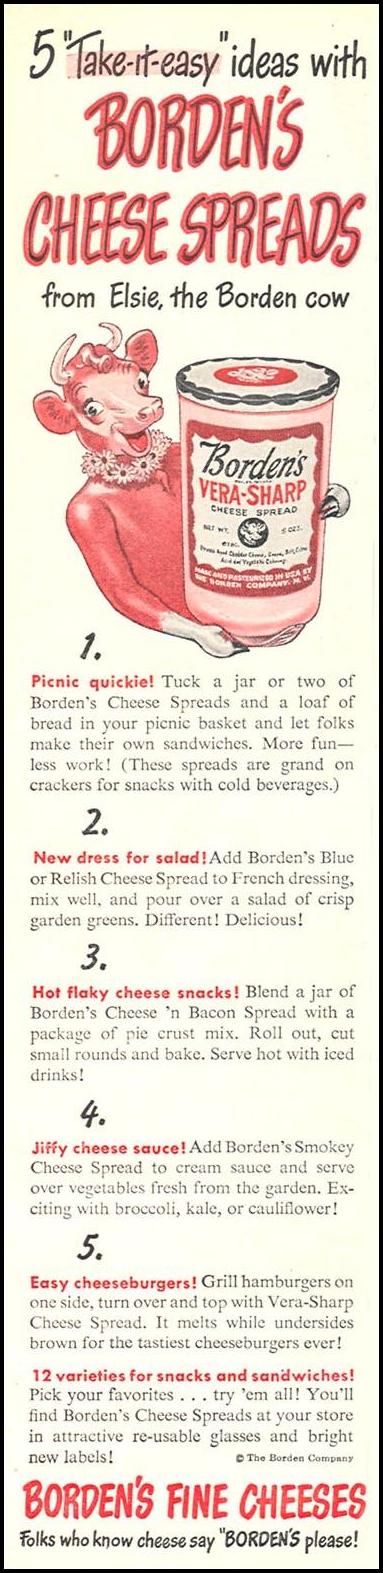 BORDEN'S CHEESE SPREADS
WOMAN'S DAY
08/01/1949
p. 58